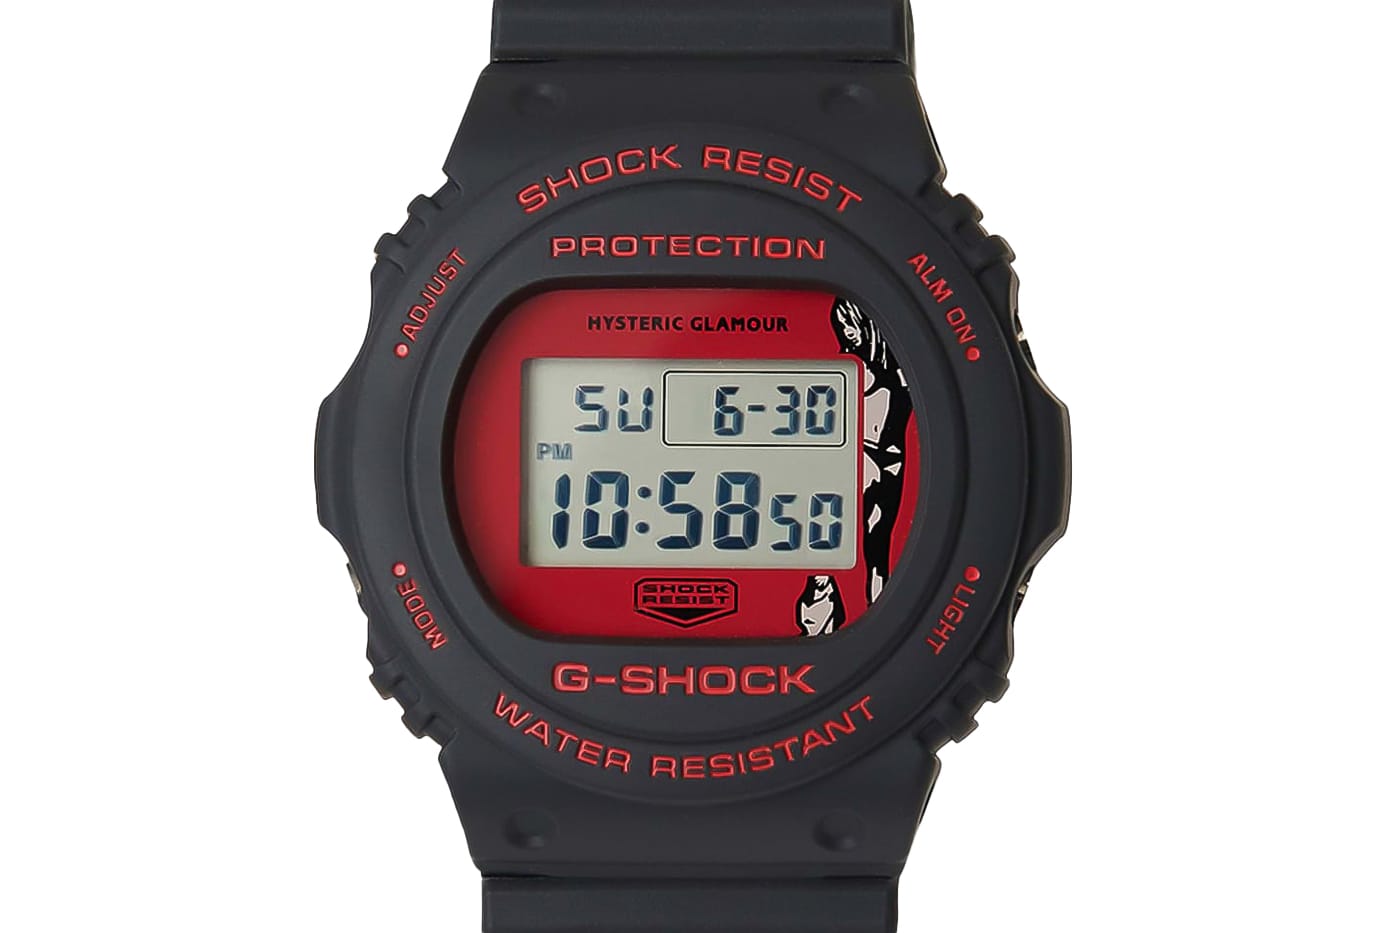 HYSTERIC GLAMOUR x Casio G-SHOCK DW-5750 Release | Hypebeast